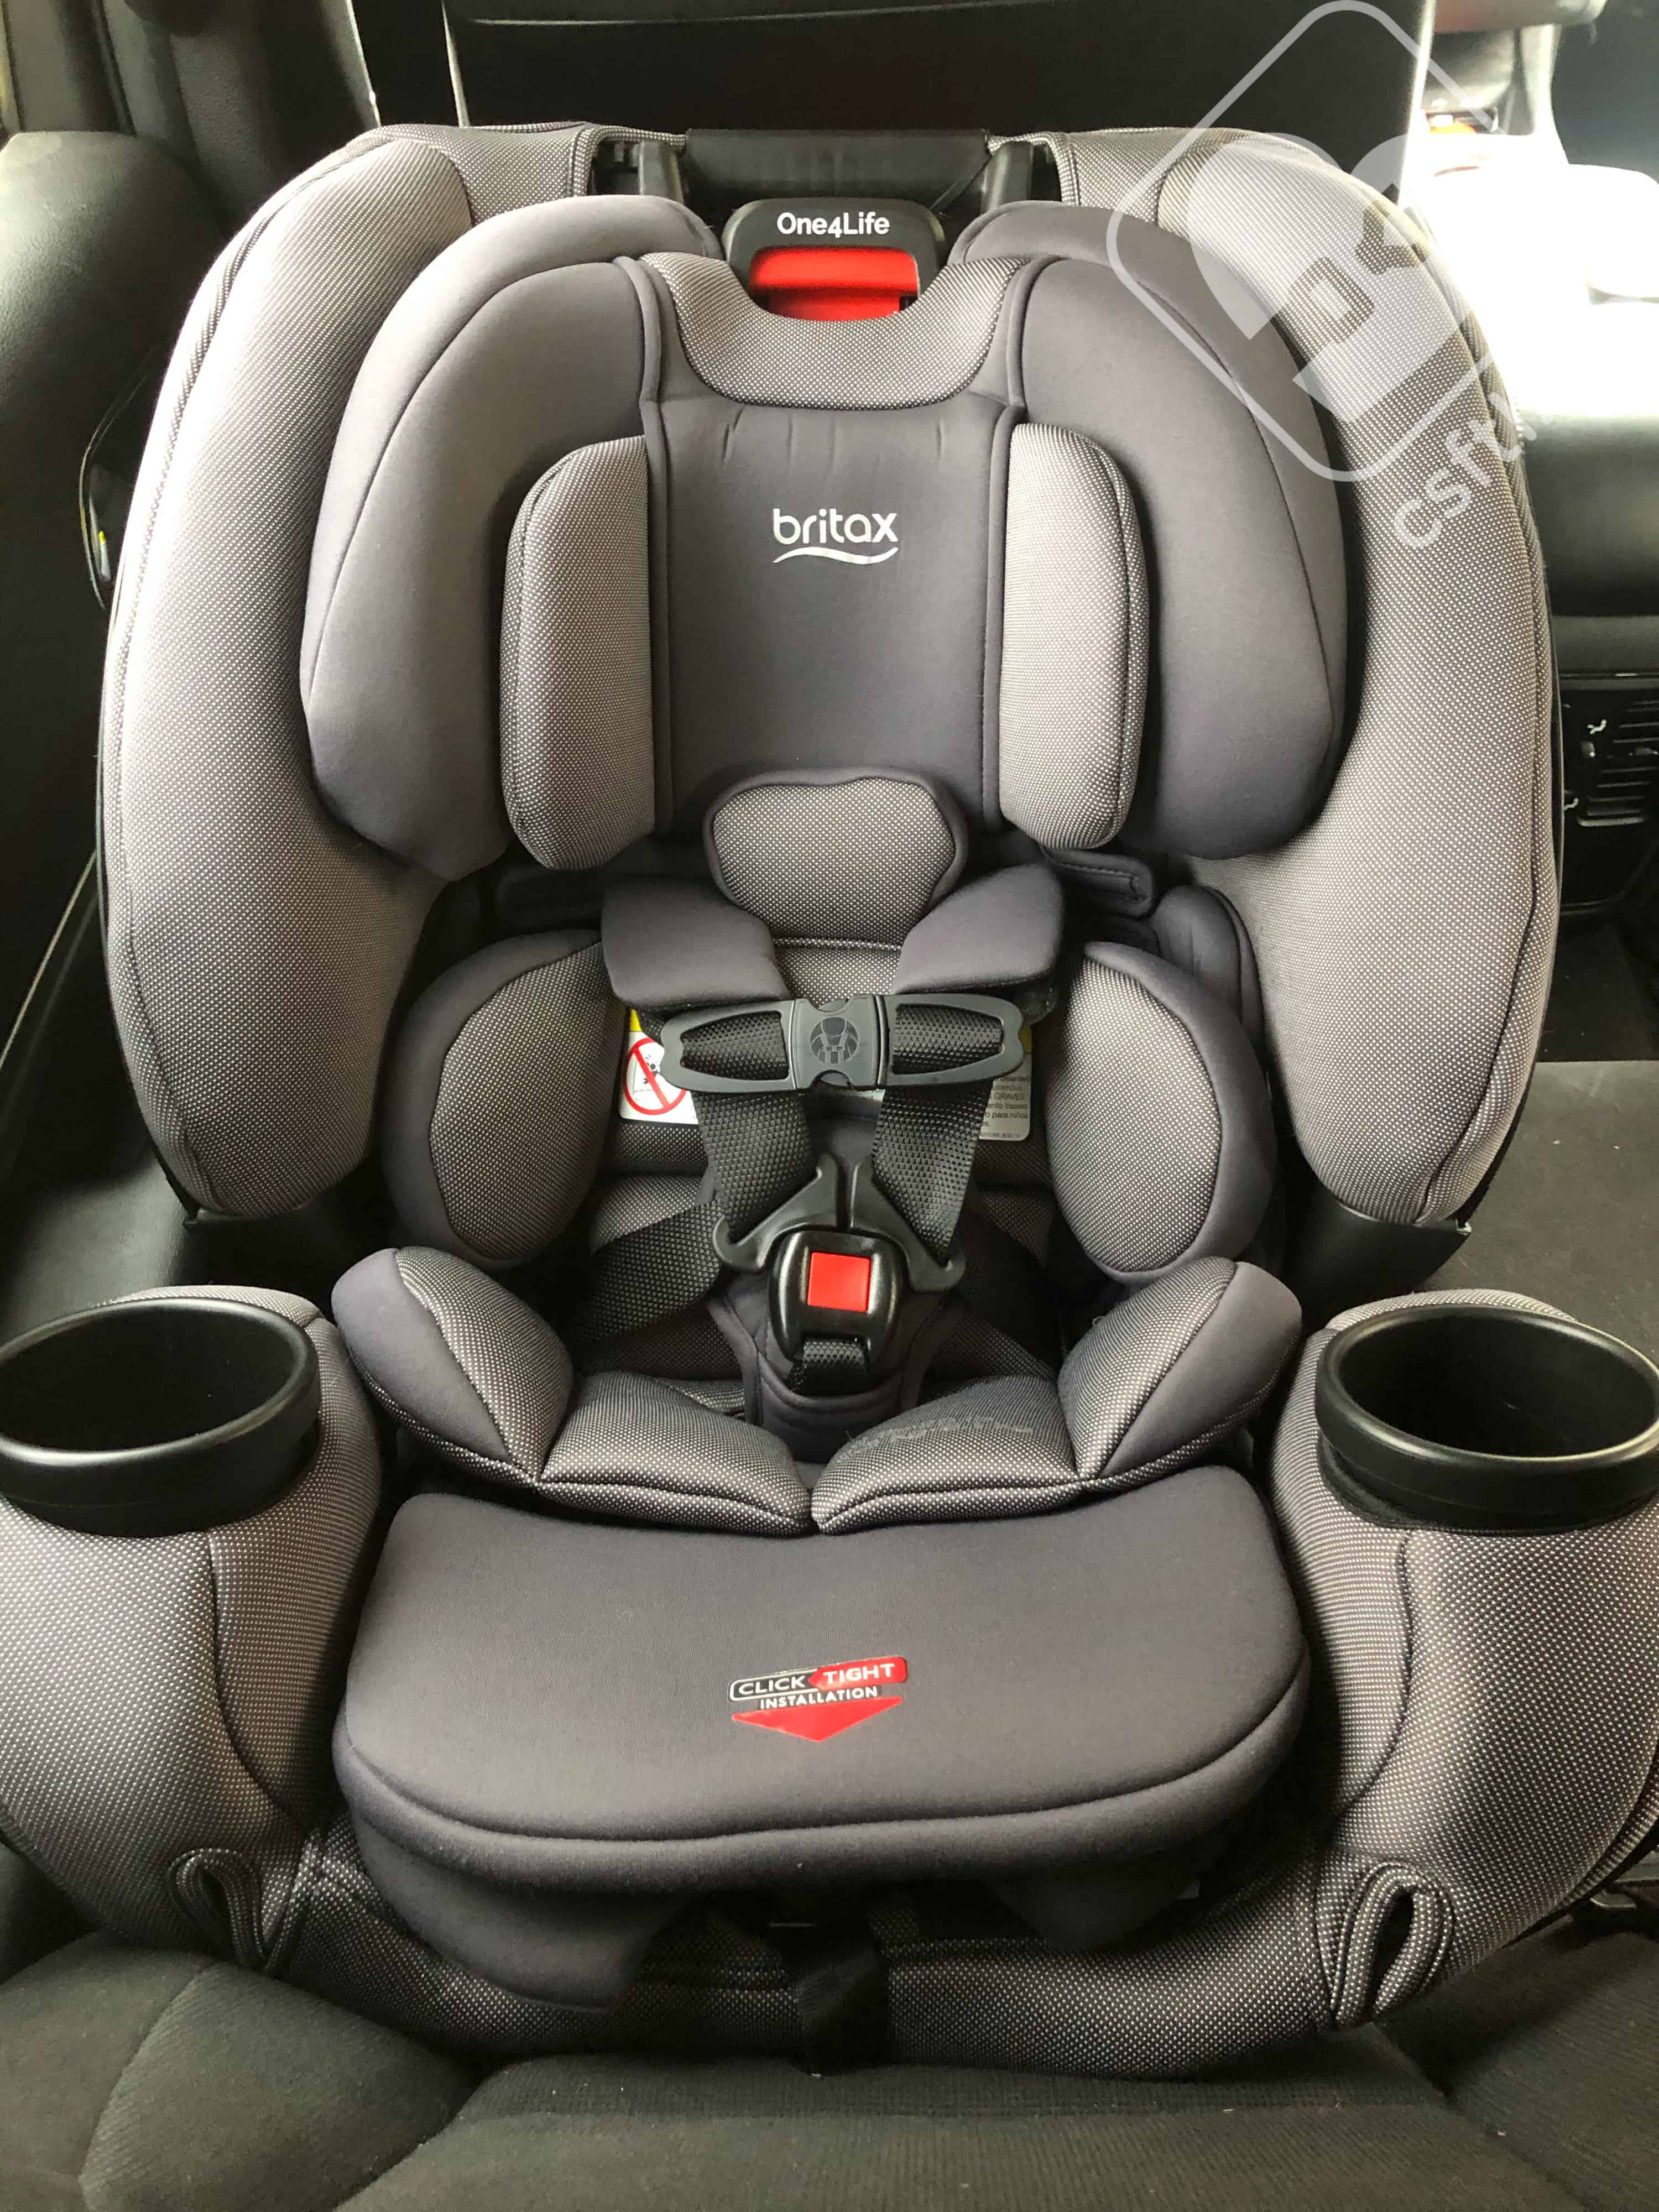 Britax One4life Review United States And Canada Car Seats For The Littles - Do You Need An Infant Insert For Britax Car Seat